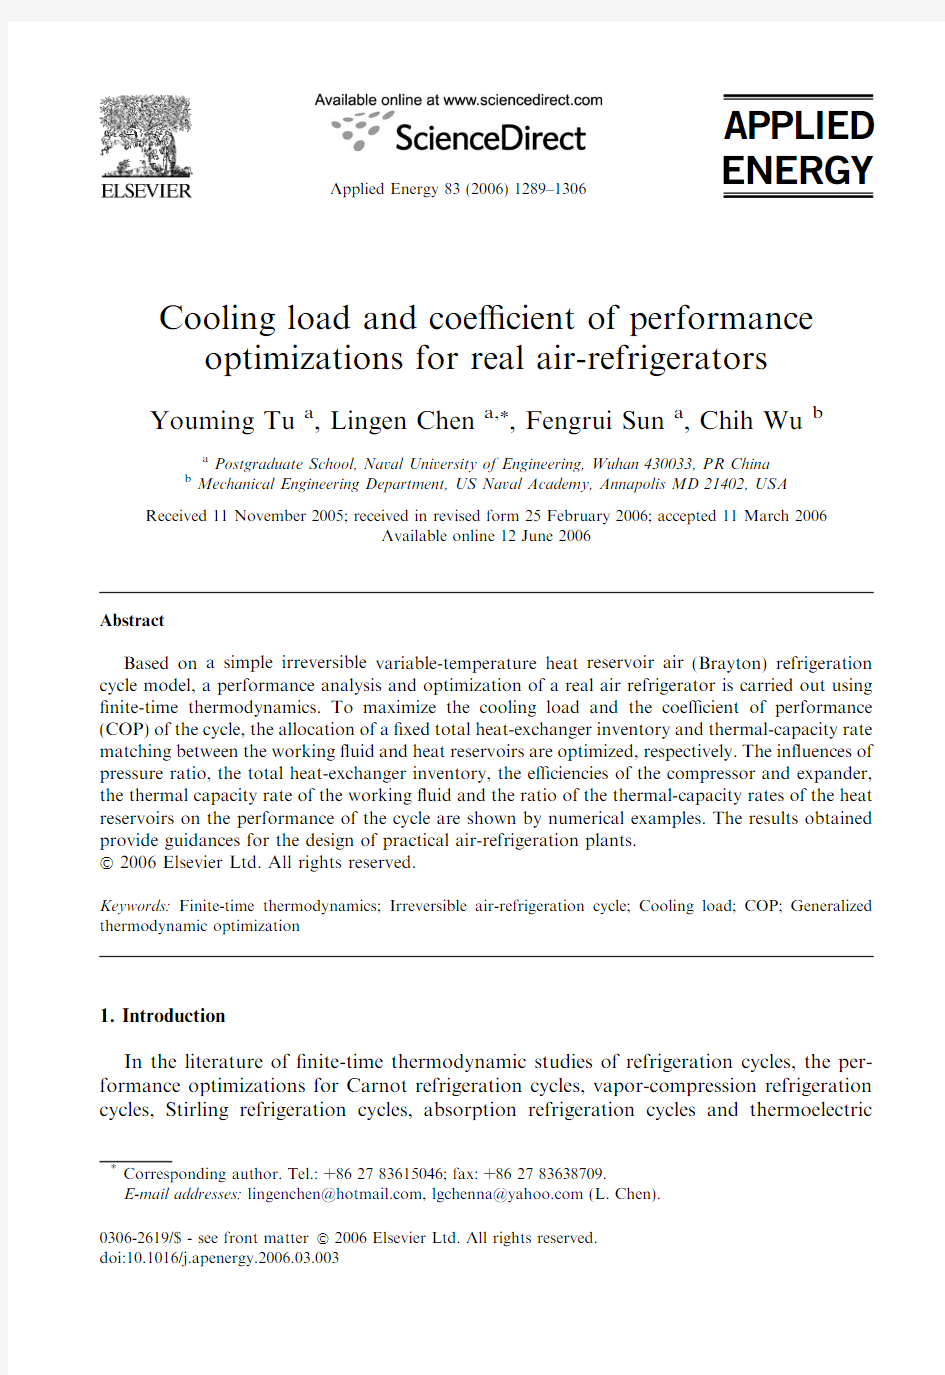 Cooling load and coefficient of performance